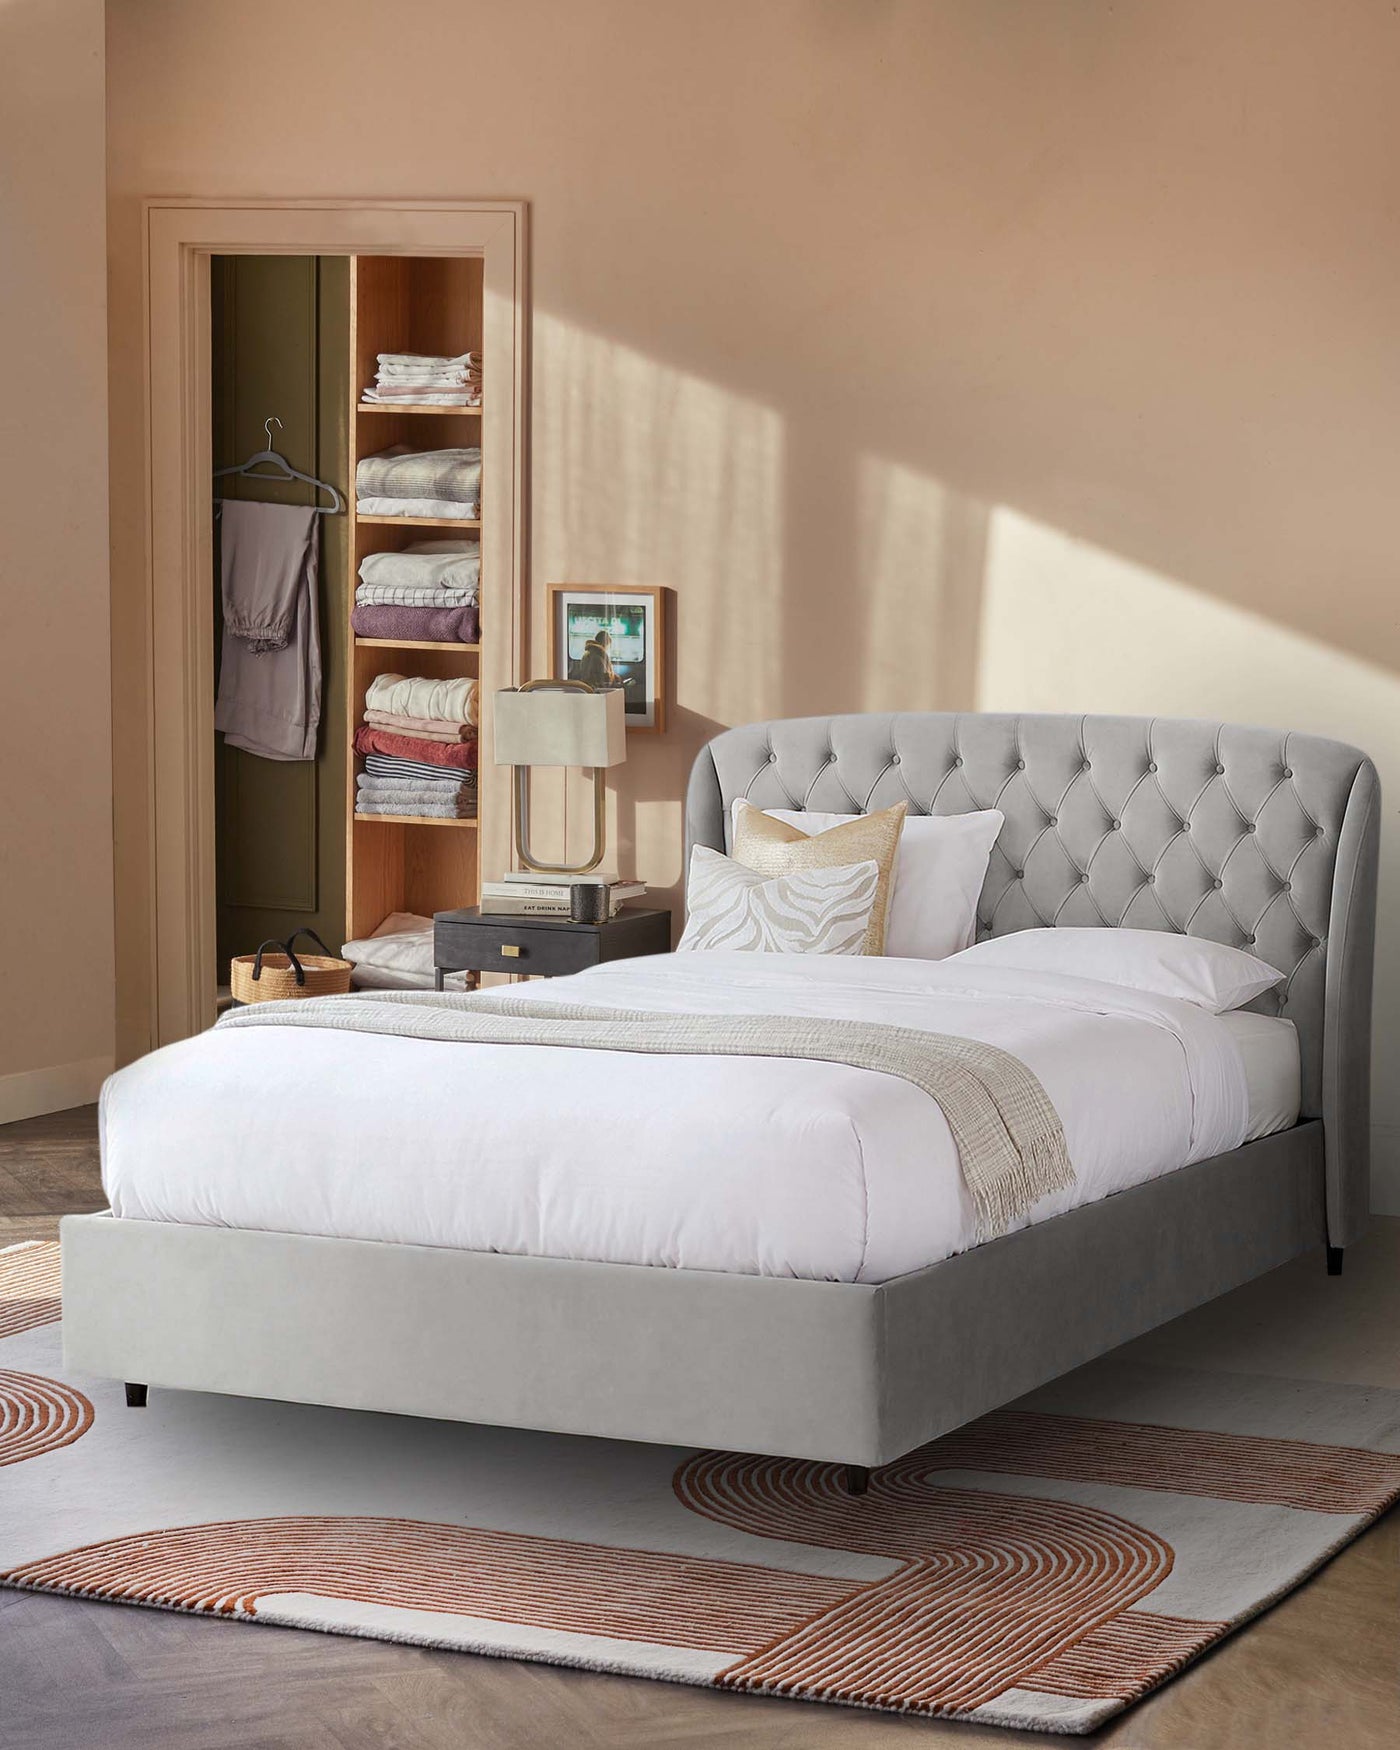 Elegant upholstered queen-sized bed with a curved, tufted headboard in a soft grey fabric, and a matching low-profile footboard. The bed is dressed in white and neutral bedding with decorative pillows. There's also a contemporary table lamp with a white shade on a bedside table. The scene is complemented by a geometric rug with brown and beige accents.